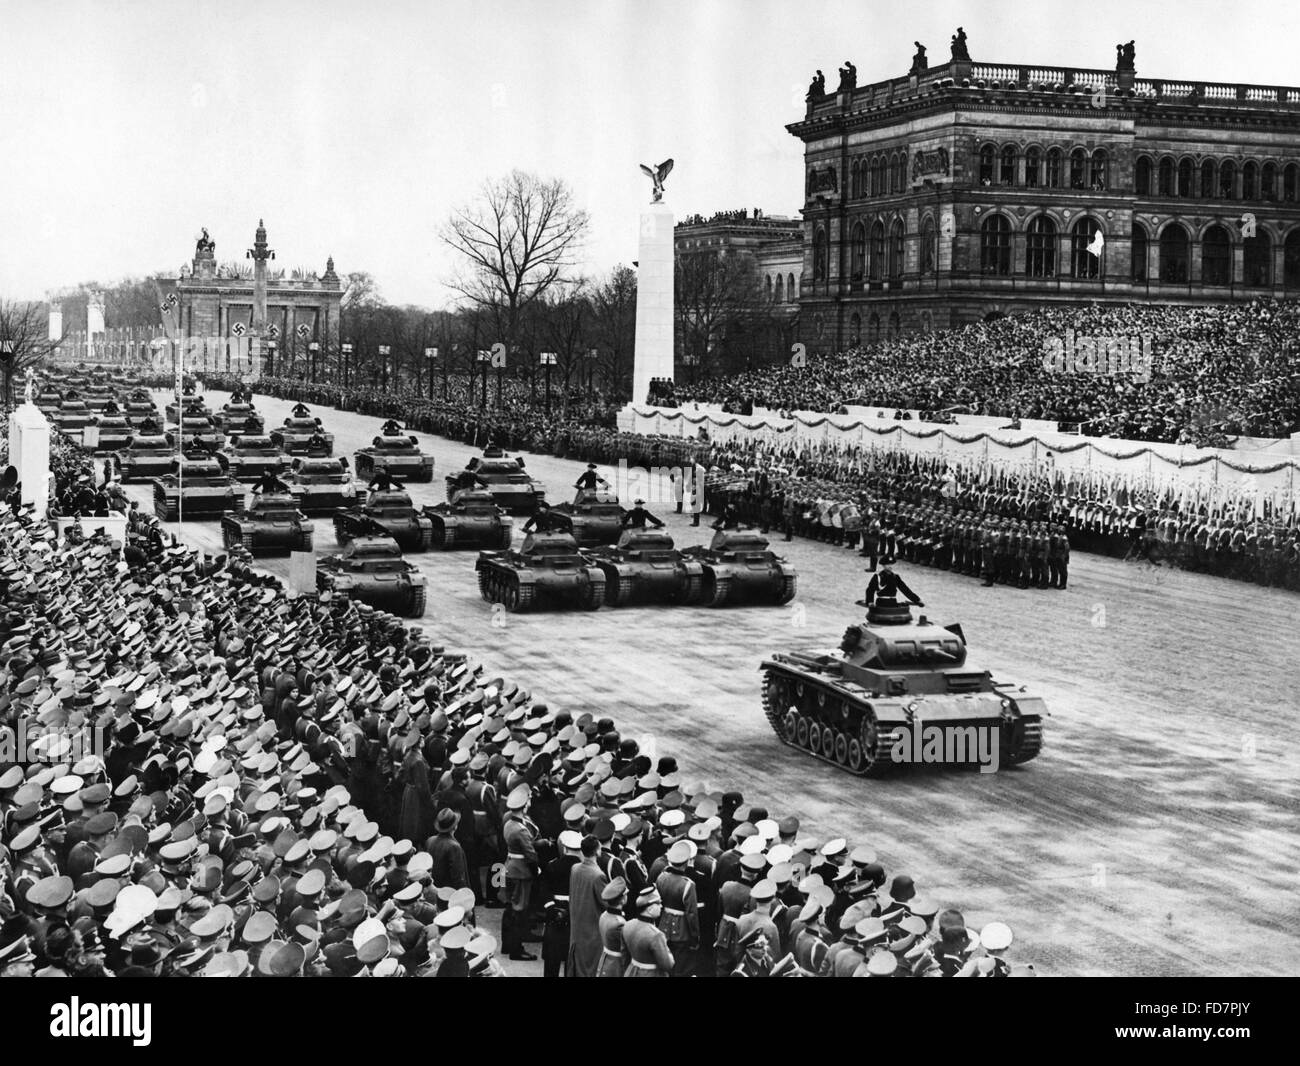 Military parade of the Wehrmacht on the occasion of Hitler's birthday in Berlin, 1939 Stock Photo